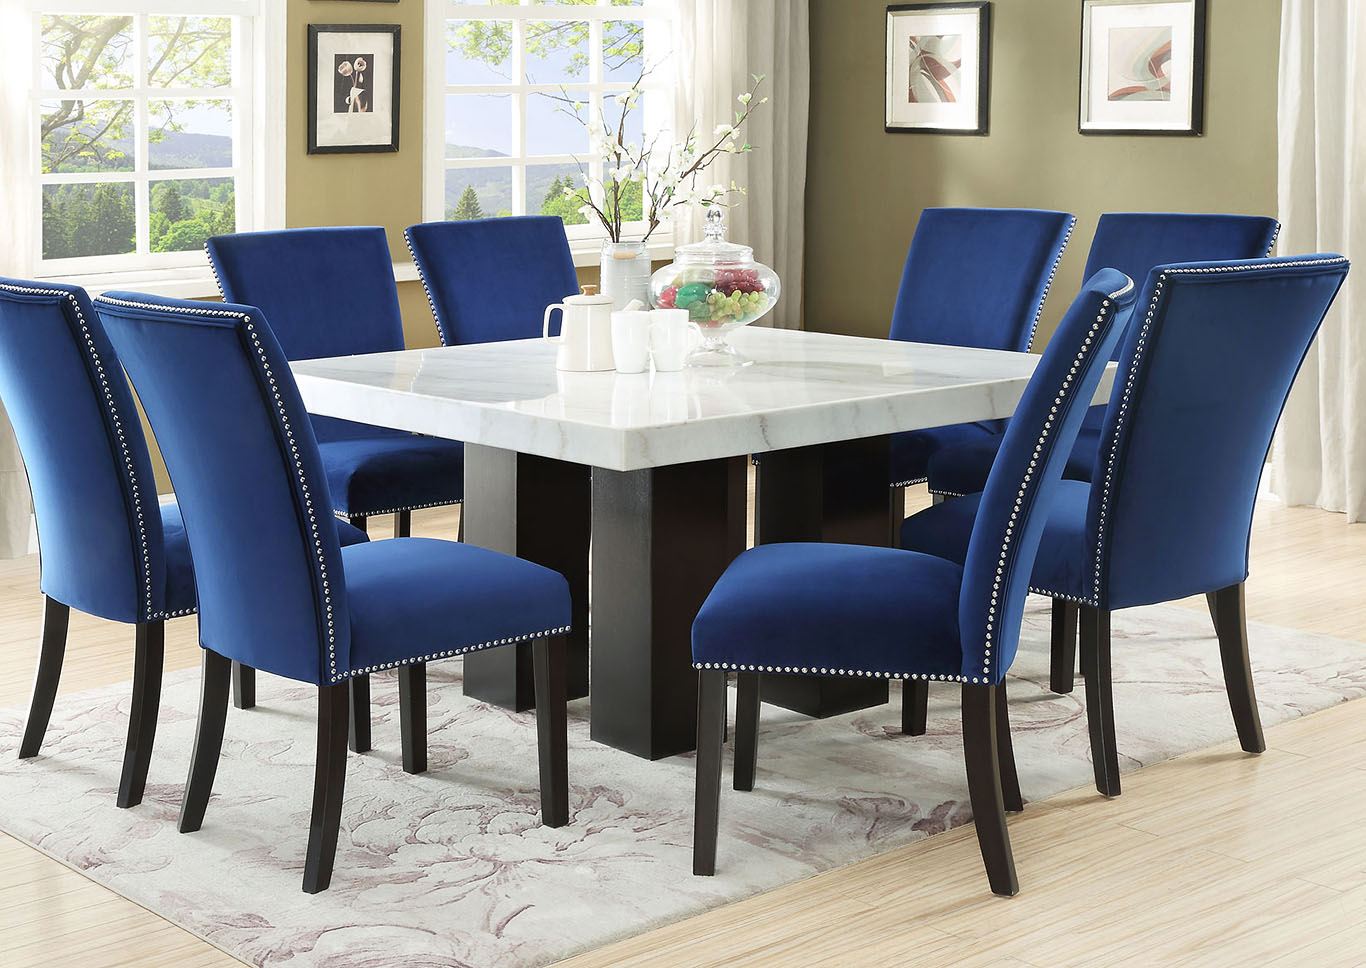 8 Chair Square Dining Room Set